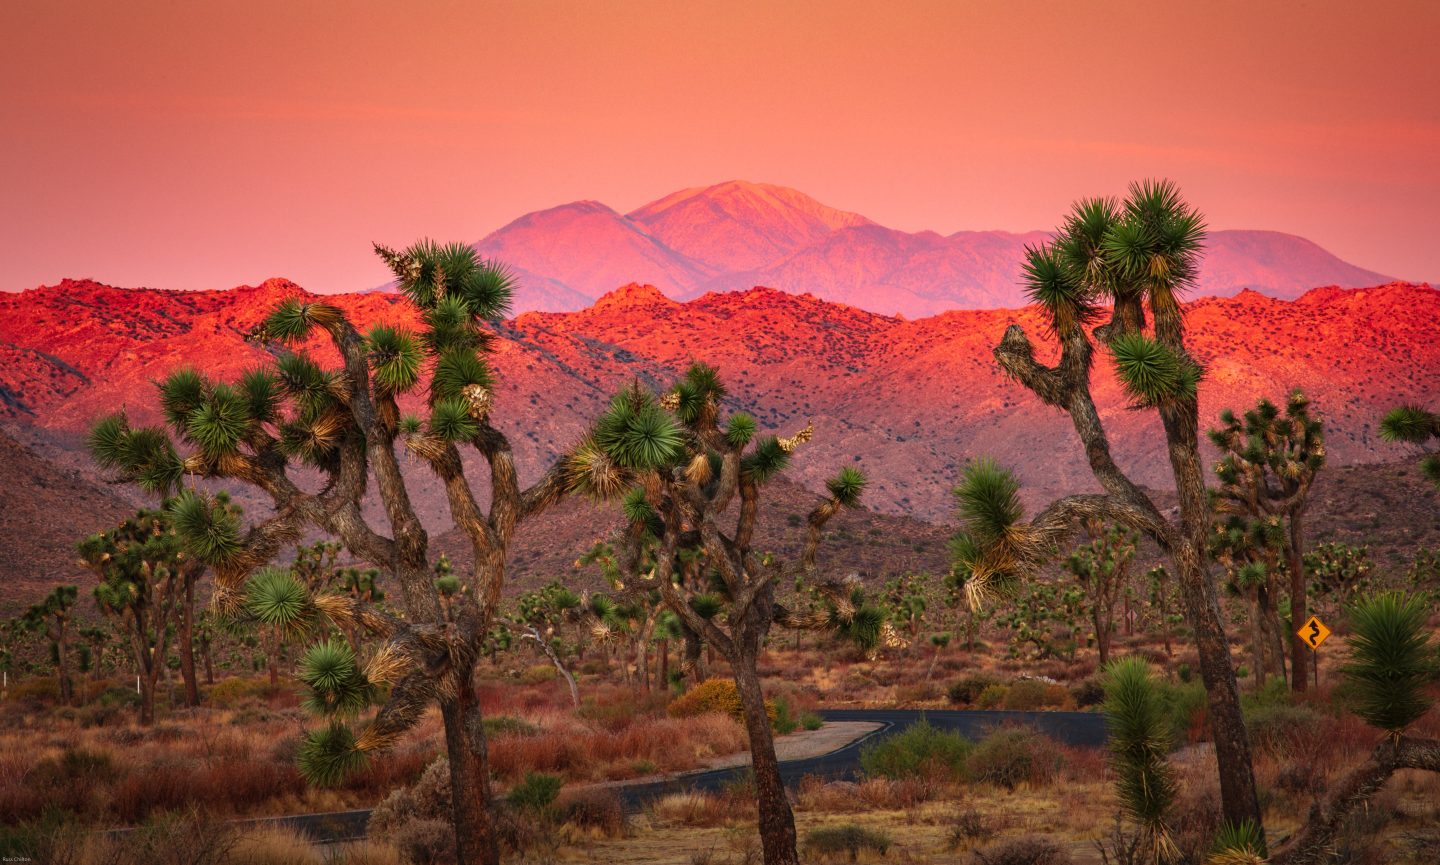 A bright pink and red sunrise over San Gorgonio montain in Joshua Tree National Park, one of the best relaxing destinations.